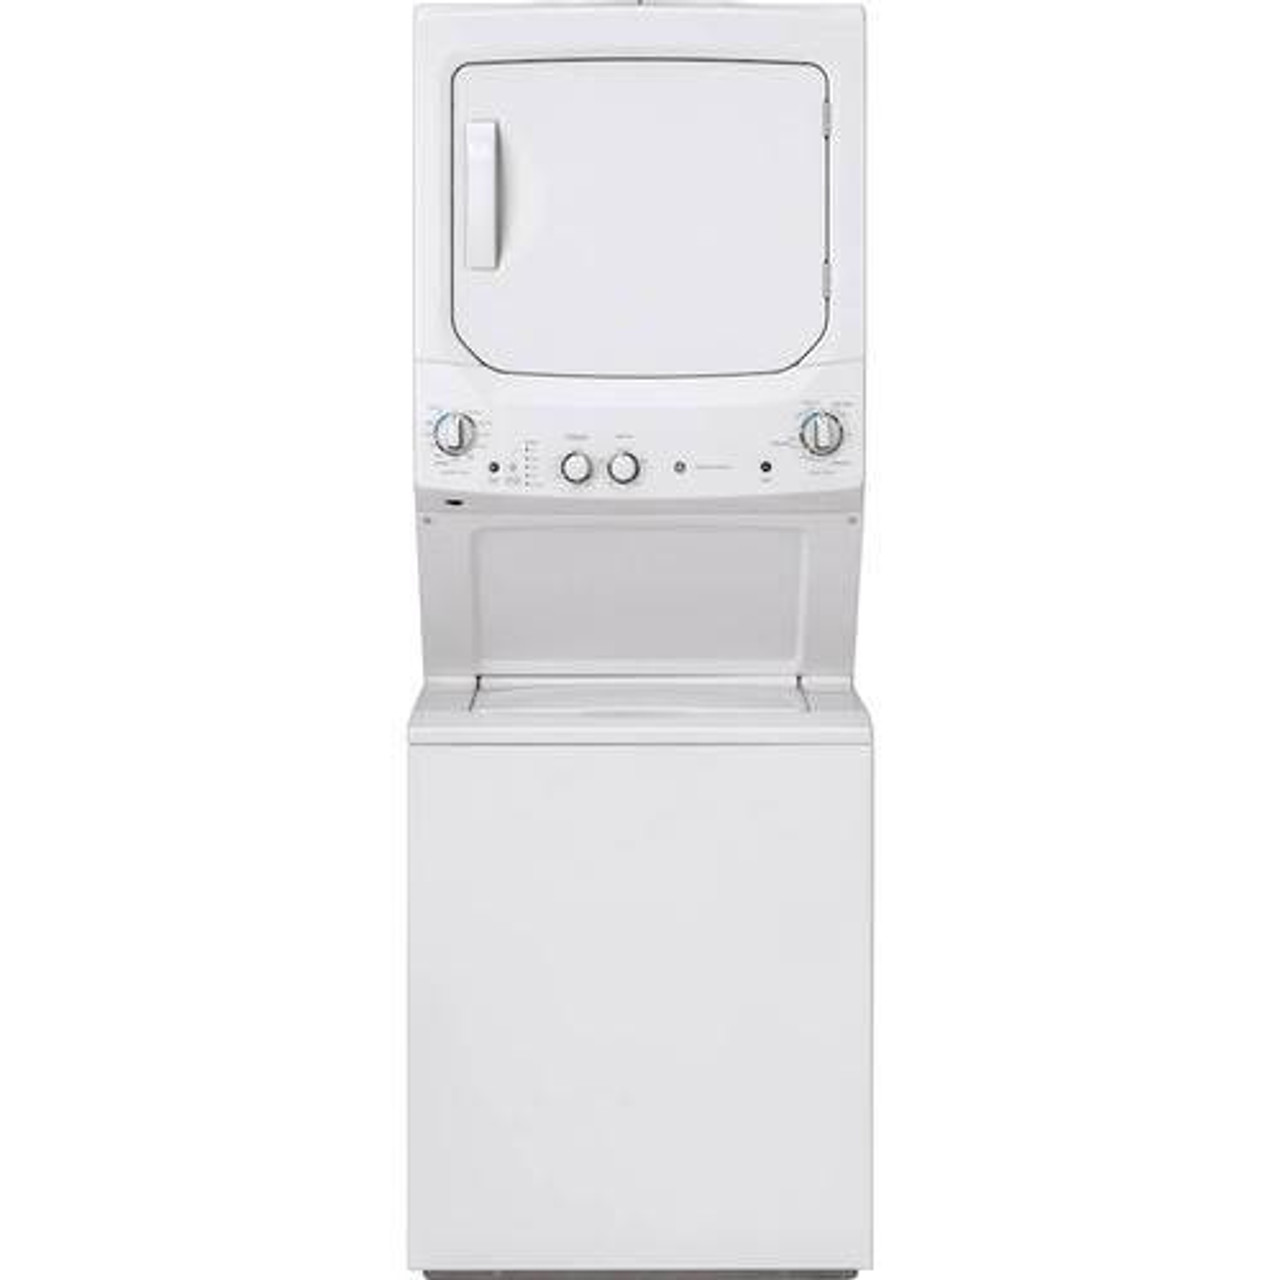 GE - Unitized Spacemaker 3.8 Cu. Ft. 11-Cycle Washer and 5.9 Cu. Ft. 4-Cycle Gas Dryer Combo